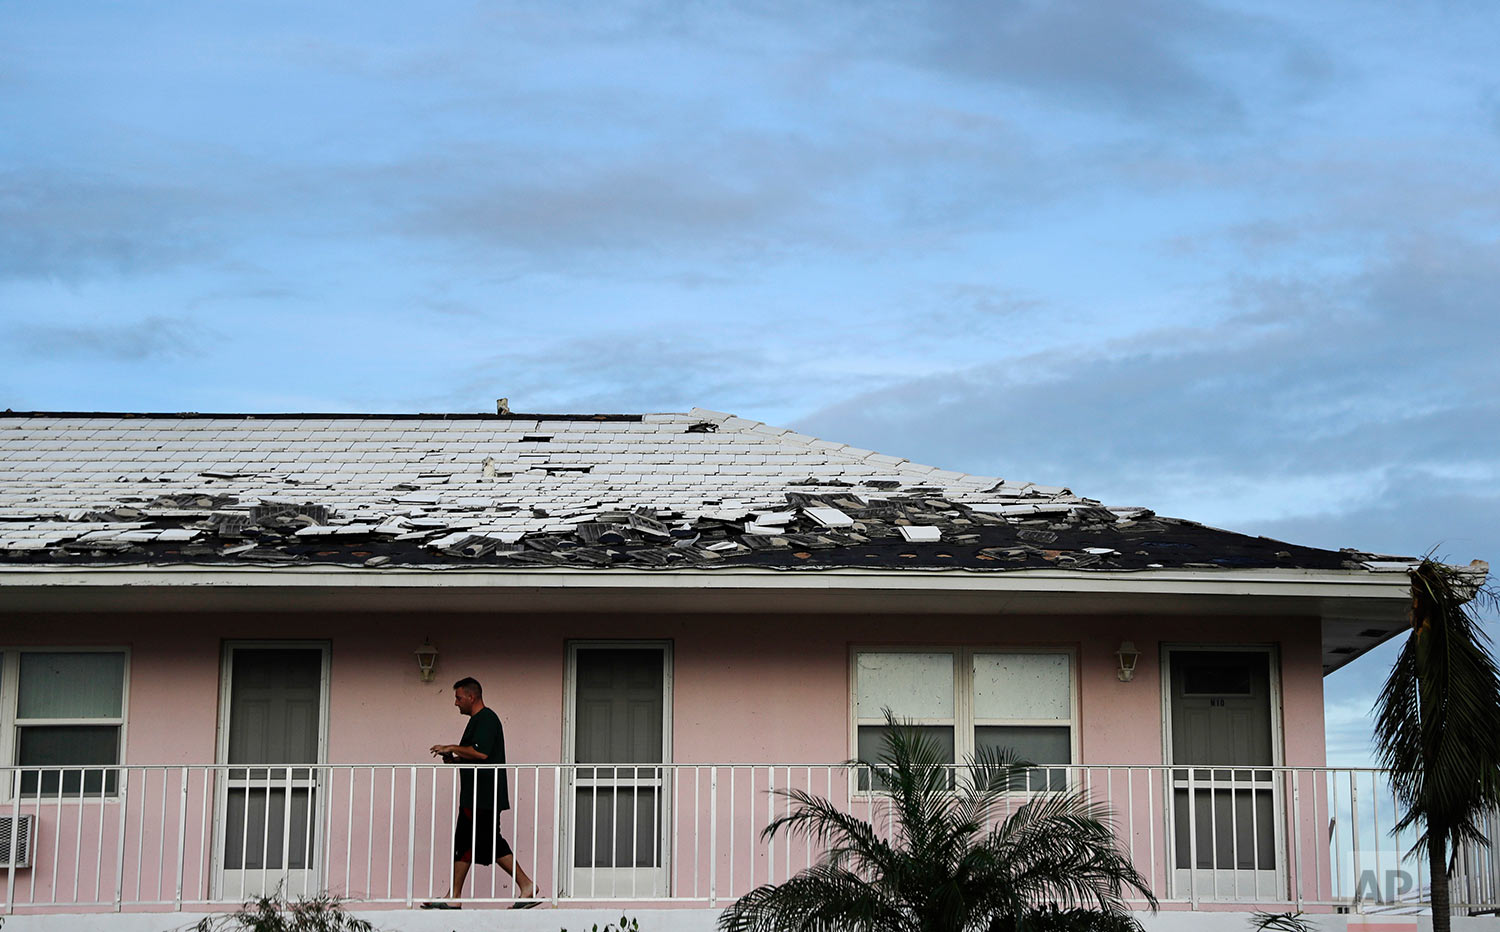  Tony Loduca walks back to his apartment past a roof whose tiles where torn off from Hurricane Irma in Marco Island, Fla., Monday, Sept. 11, 2017. (AP Photo/David Goldman) 